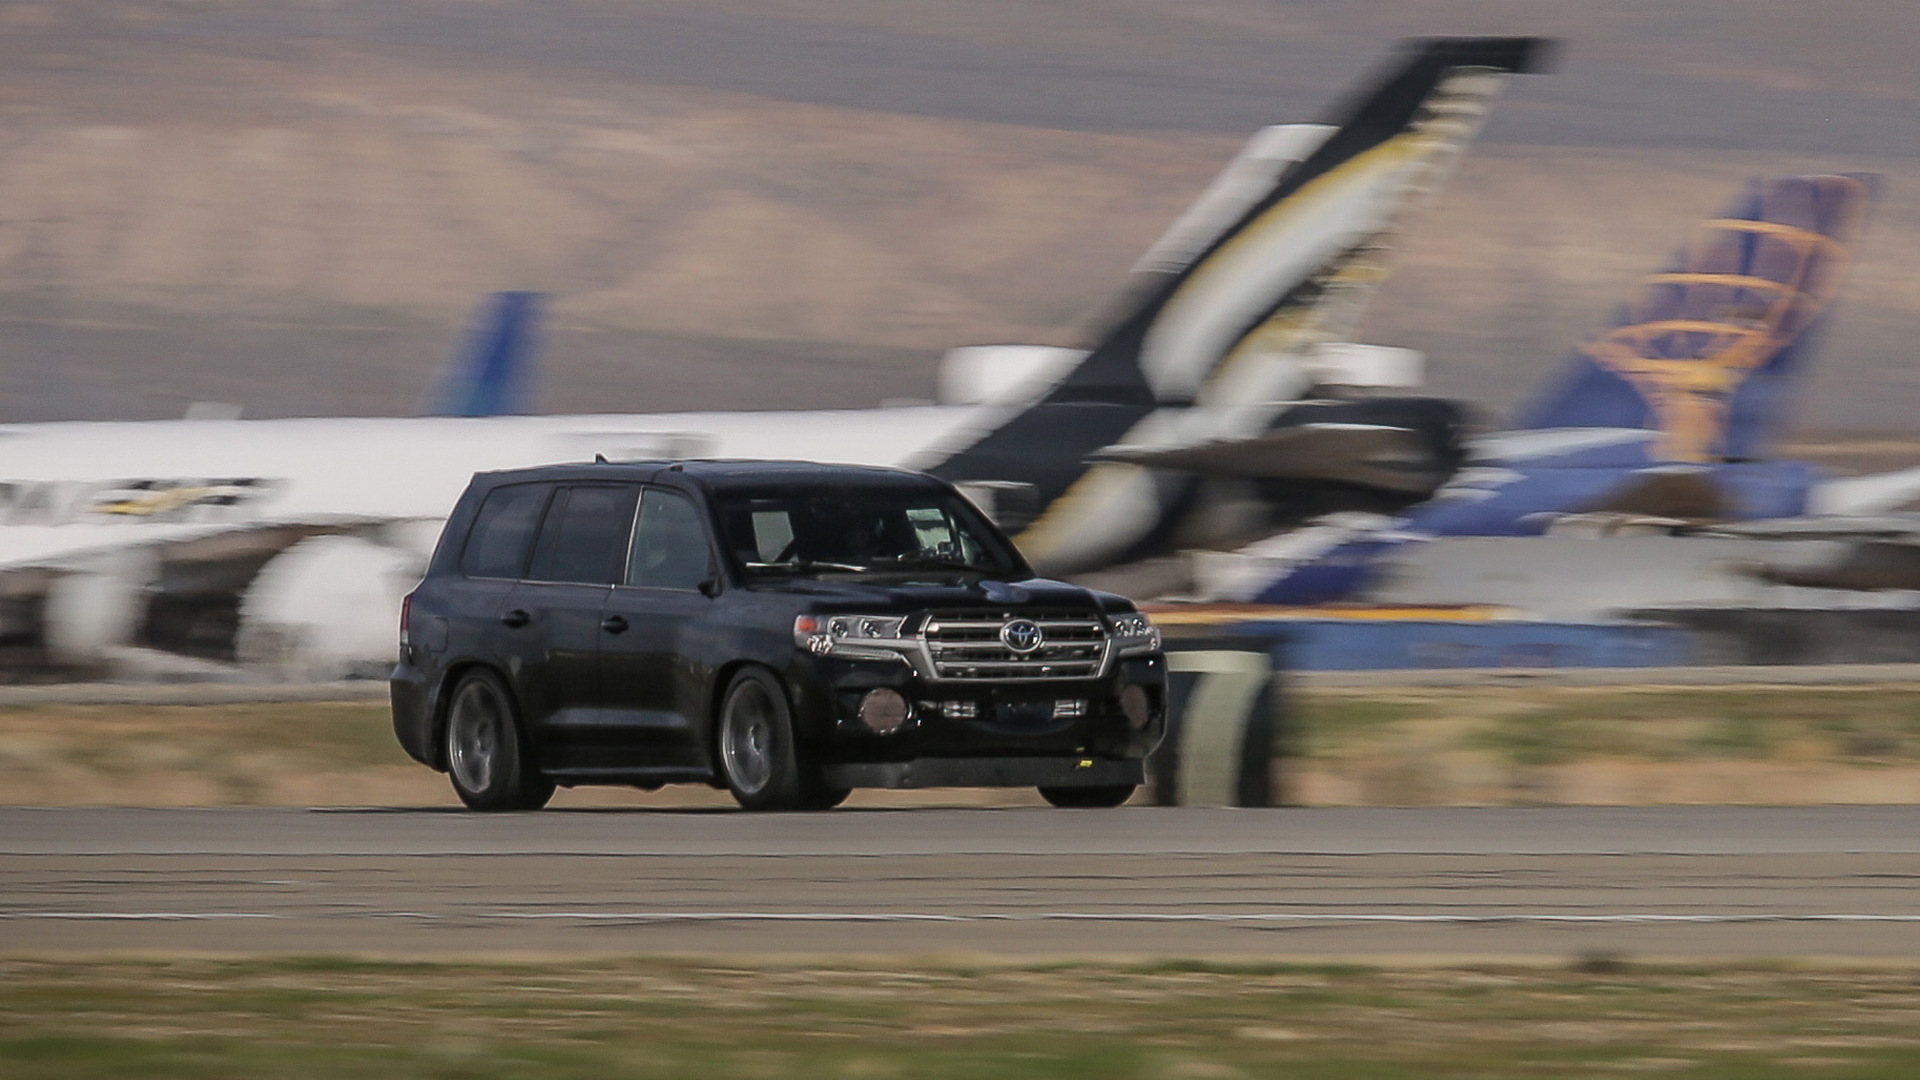 Carl Edwards drives the Toyota Land Speed Cruiser to 230.02 mph in Mojave, California